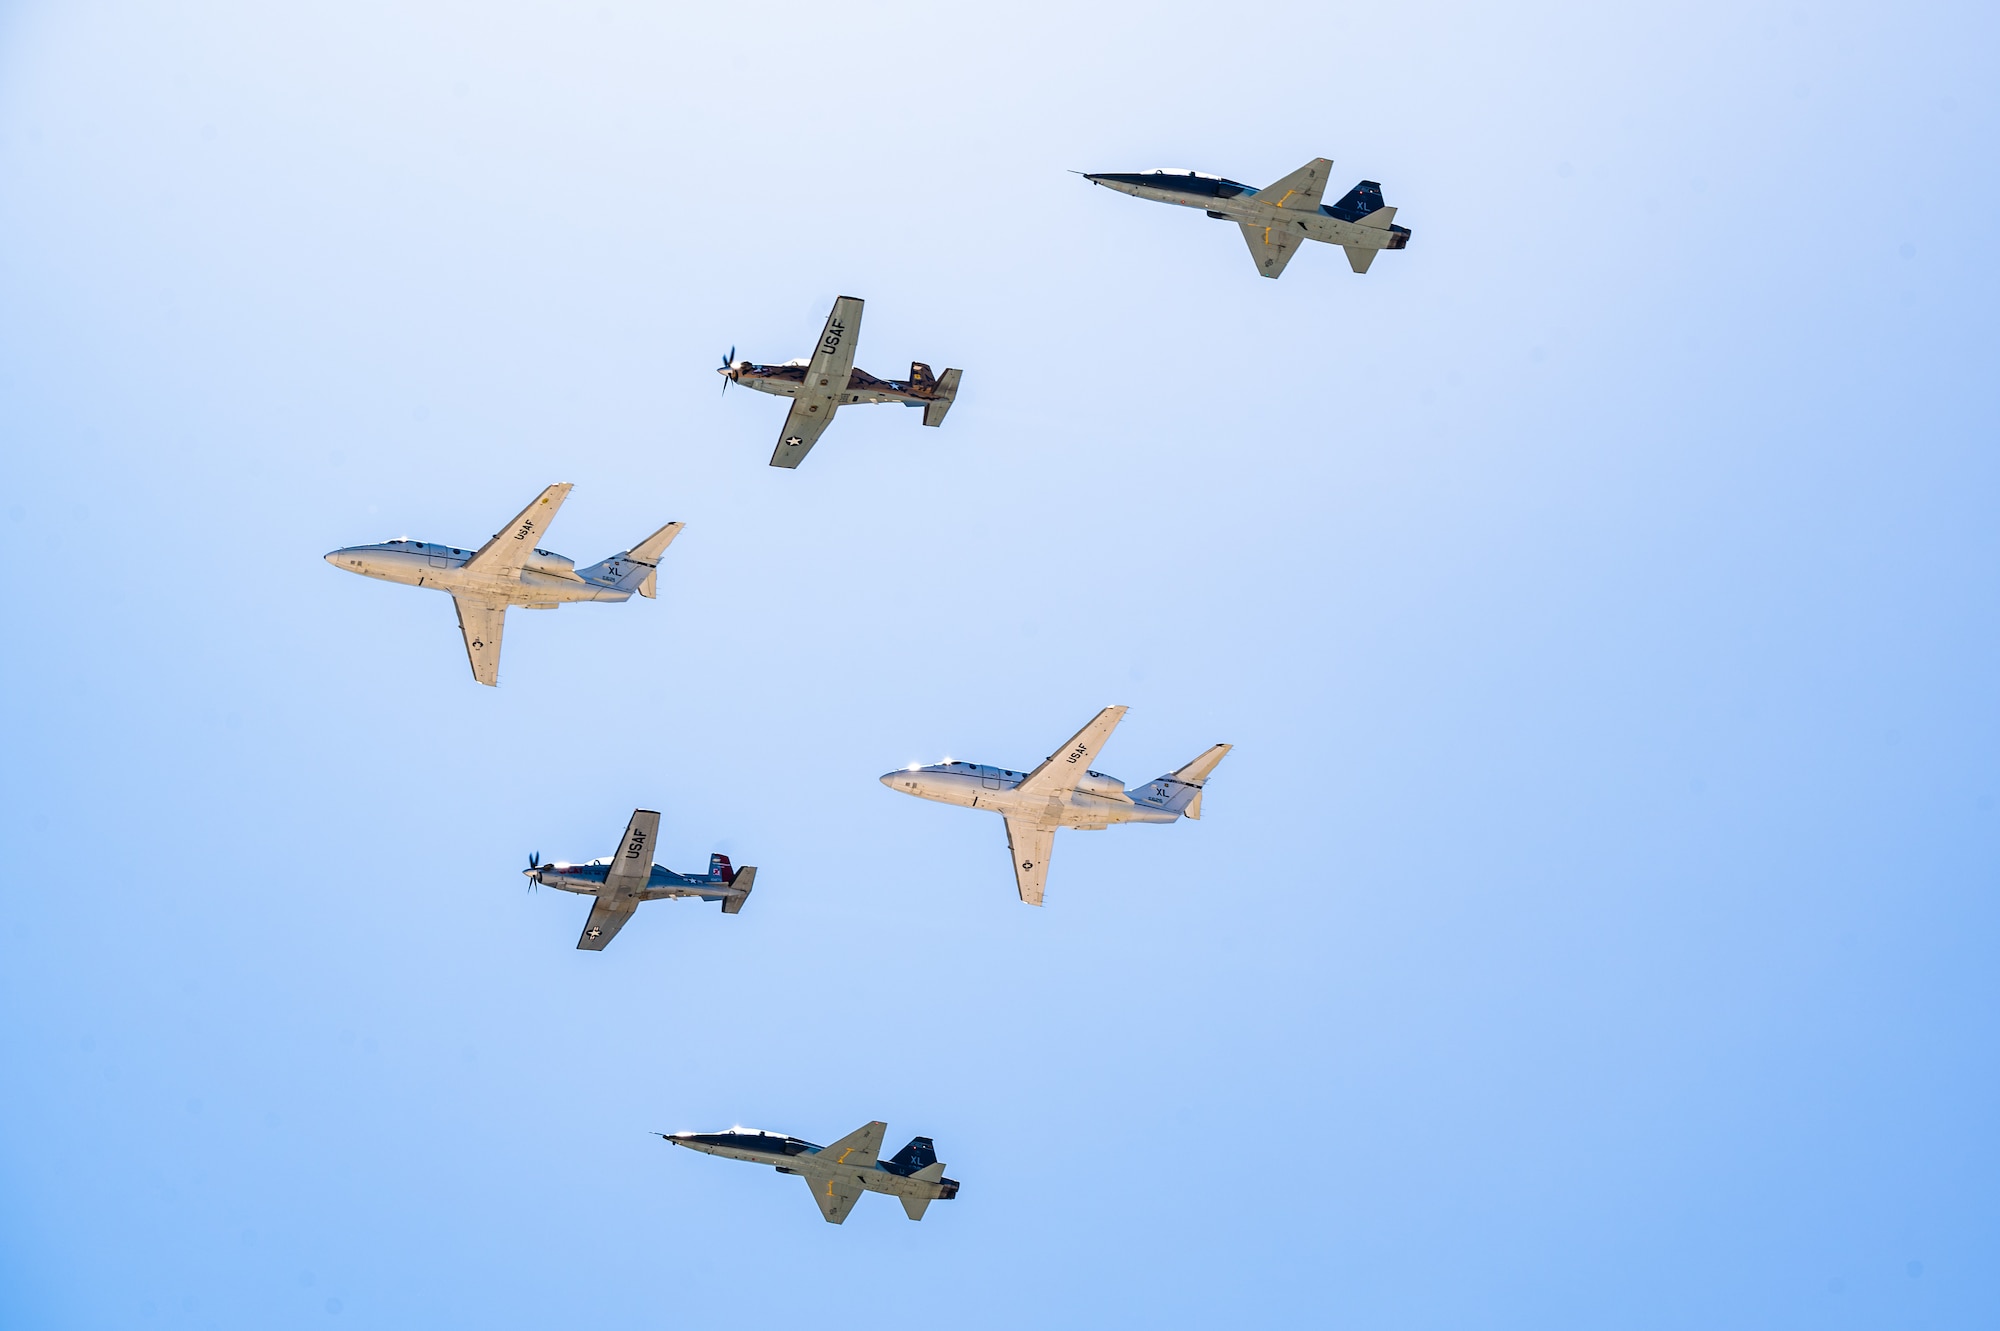 Six U.S. Air Force aircraft perform a flyover at Laughlin Air Force Base, Texas, March 9, 2024. The formation included two T-1A Jayhawks, two T-6A Texan II’s and two T-38C Talons. The flyover was performed during the Fiesta of Flight airshow at show center following the national anthem. (U.S. Air Force photo by Airman 1st Class Keira Rossman)